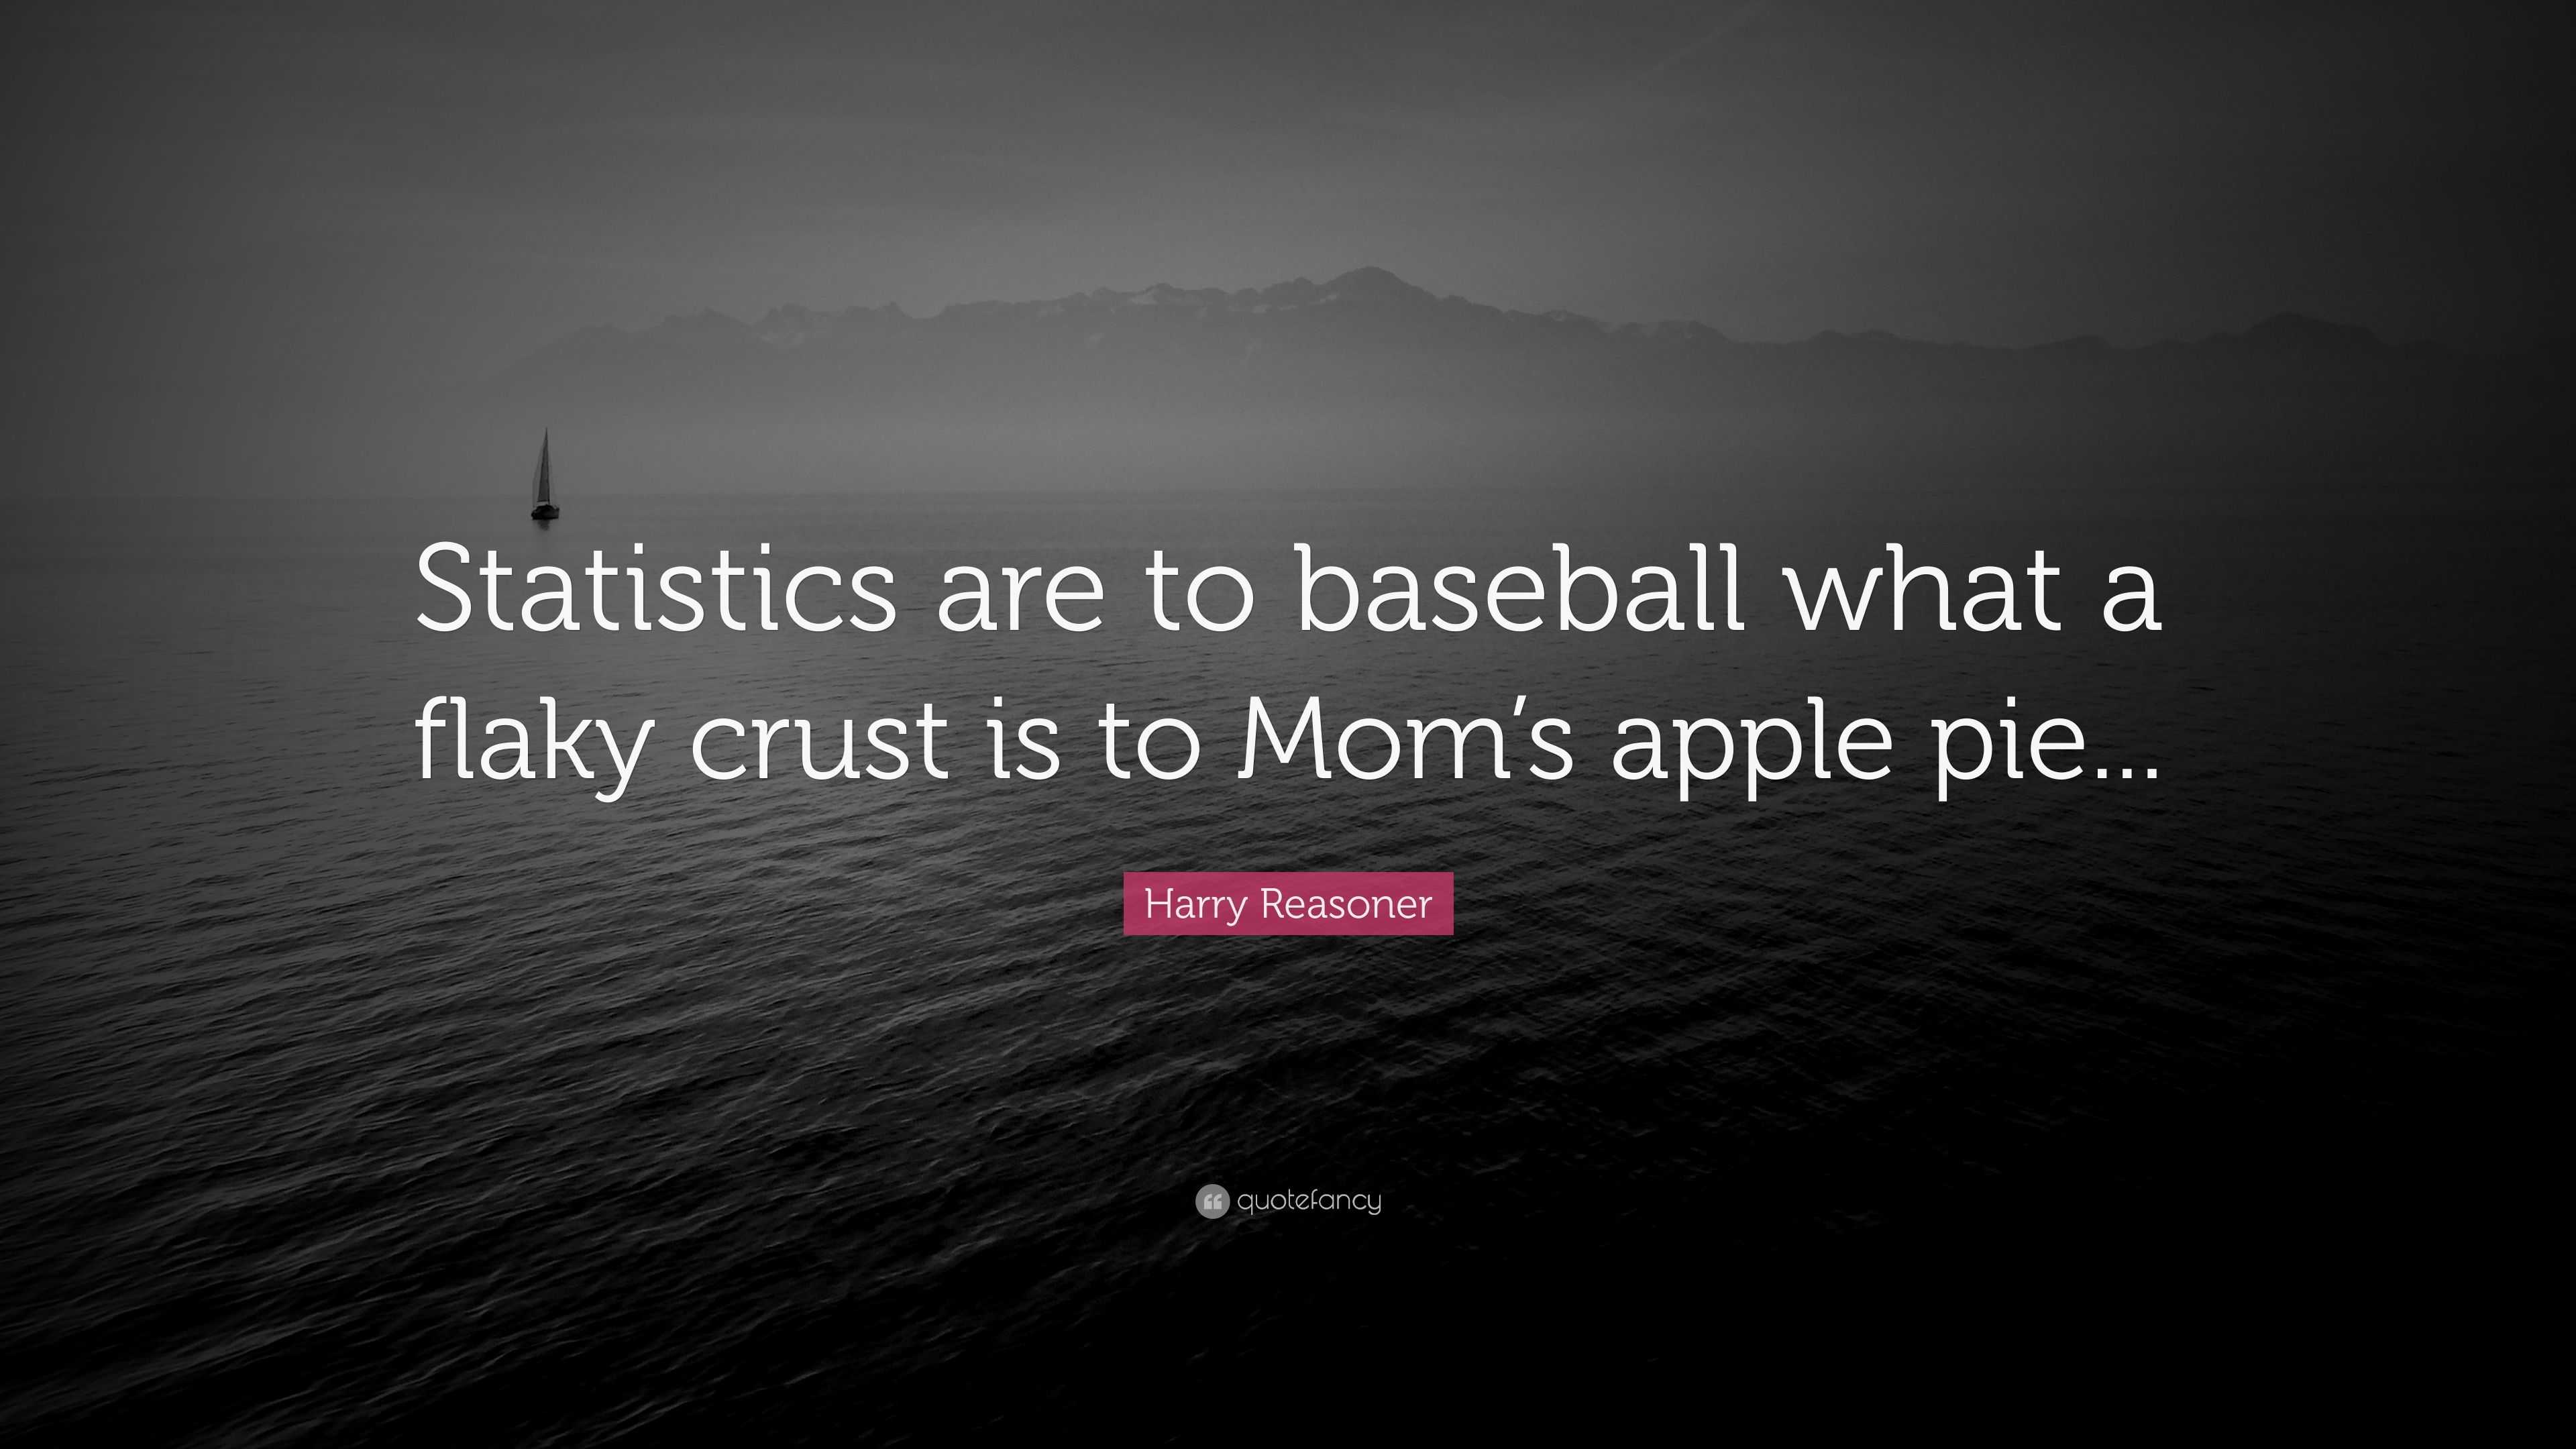 Harry Reasoner Quote “statistics Are To Baseball What A Flaky Crust Is To Moms Apple Pie” 5279